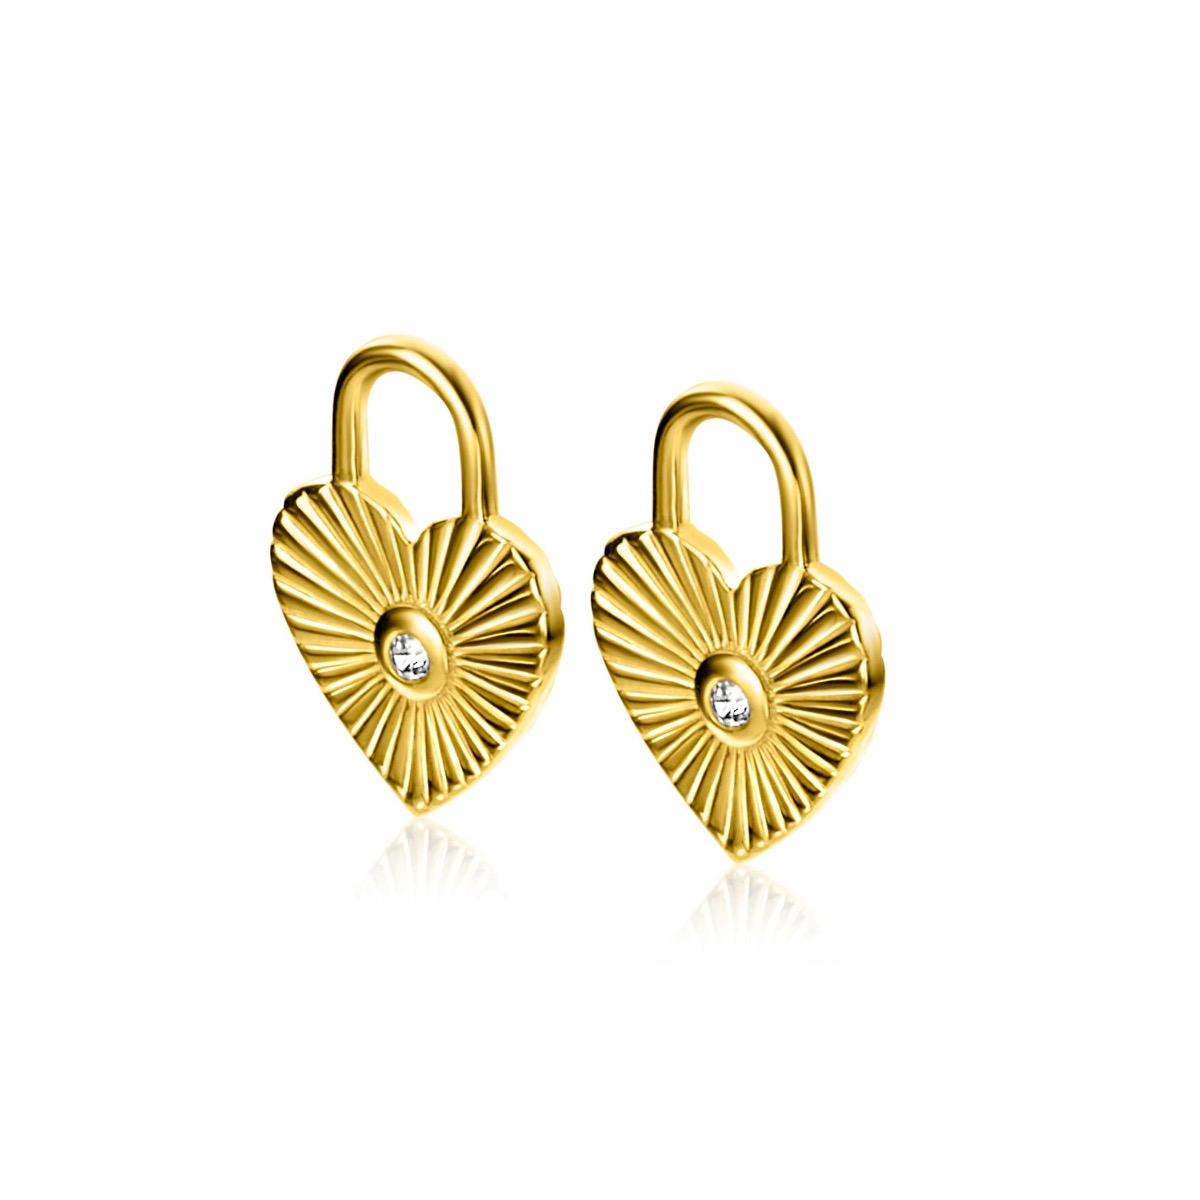 15mm ZINZI Gold Plated Sterling Silver Earrings Pendants Heart with Sunbeams and White Zirconia ZICH2305 (excl. hoop earrings)